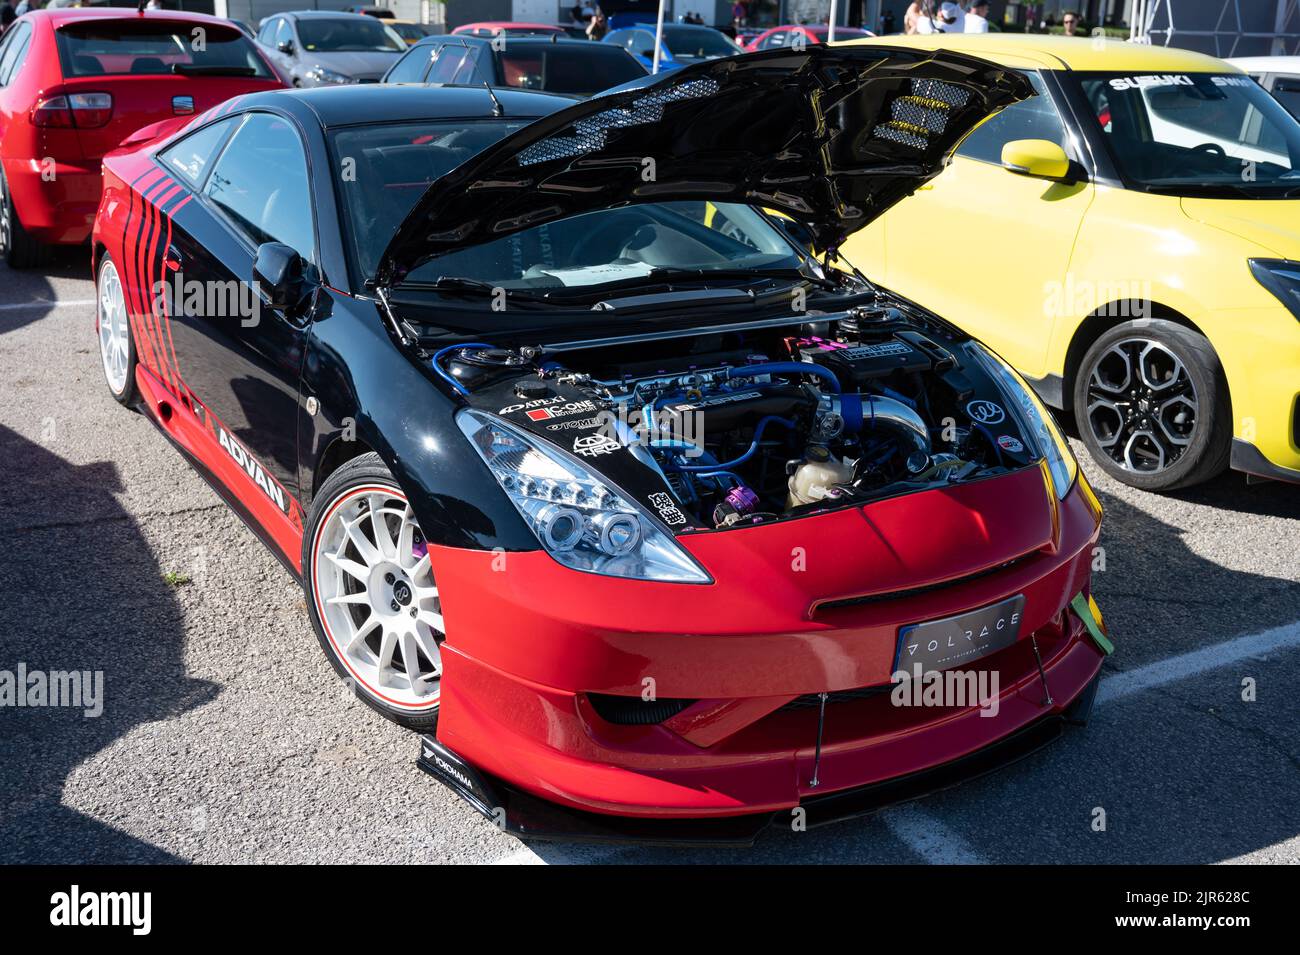 A red Toyota Celica sports car with an open hood Stock Photo